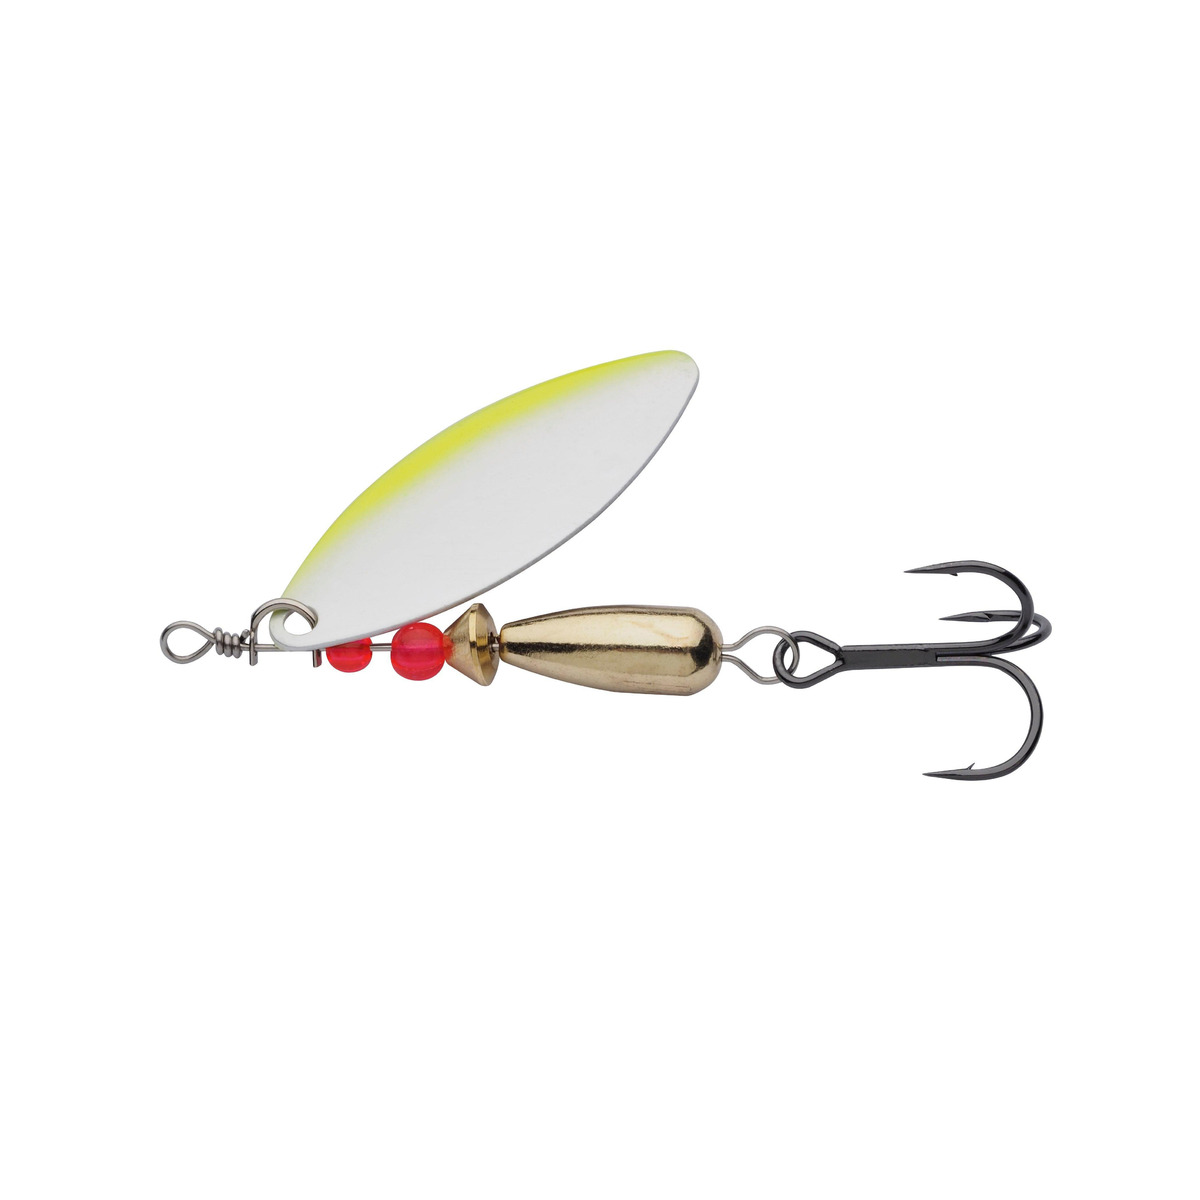 Abu Garcia Droppen Vide Spinners 10 G - Chartreuse Pearl Holo - 55 mm